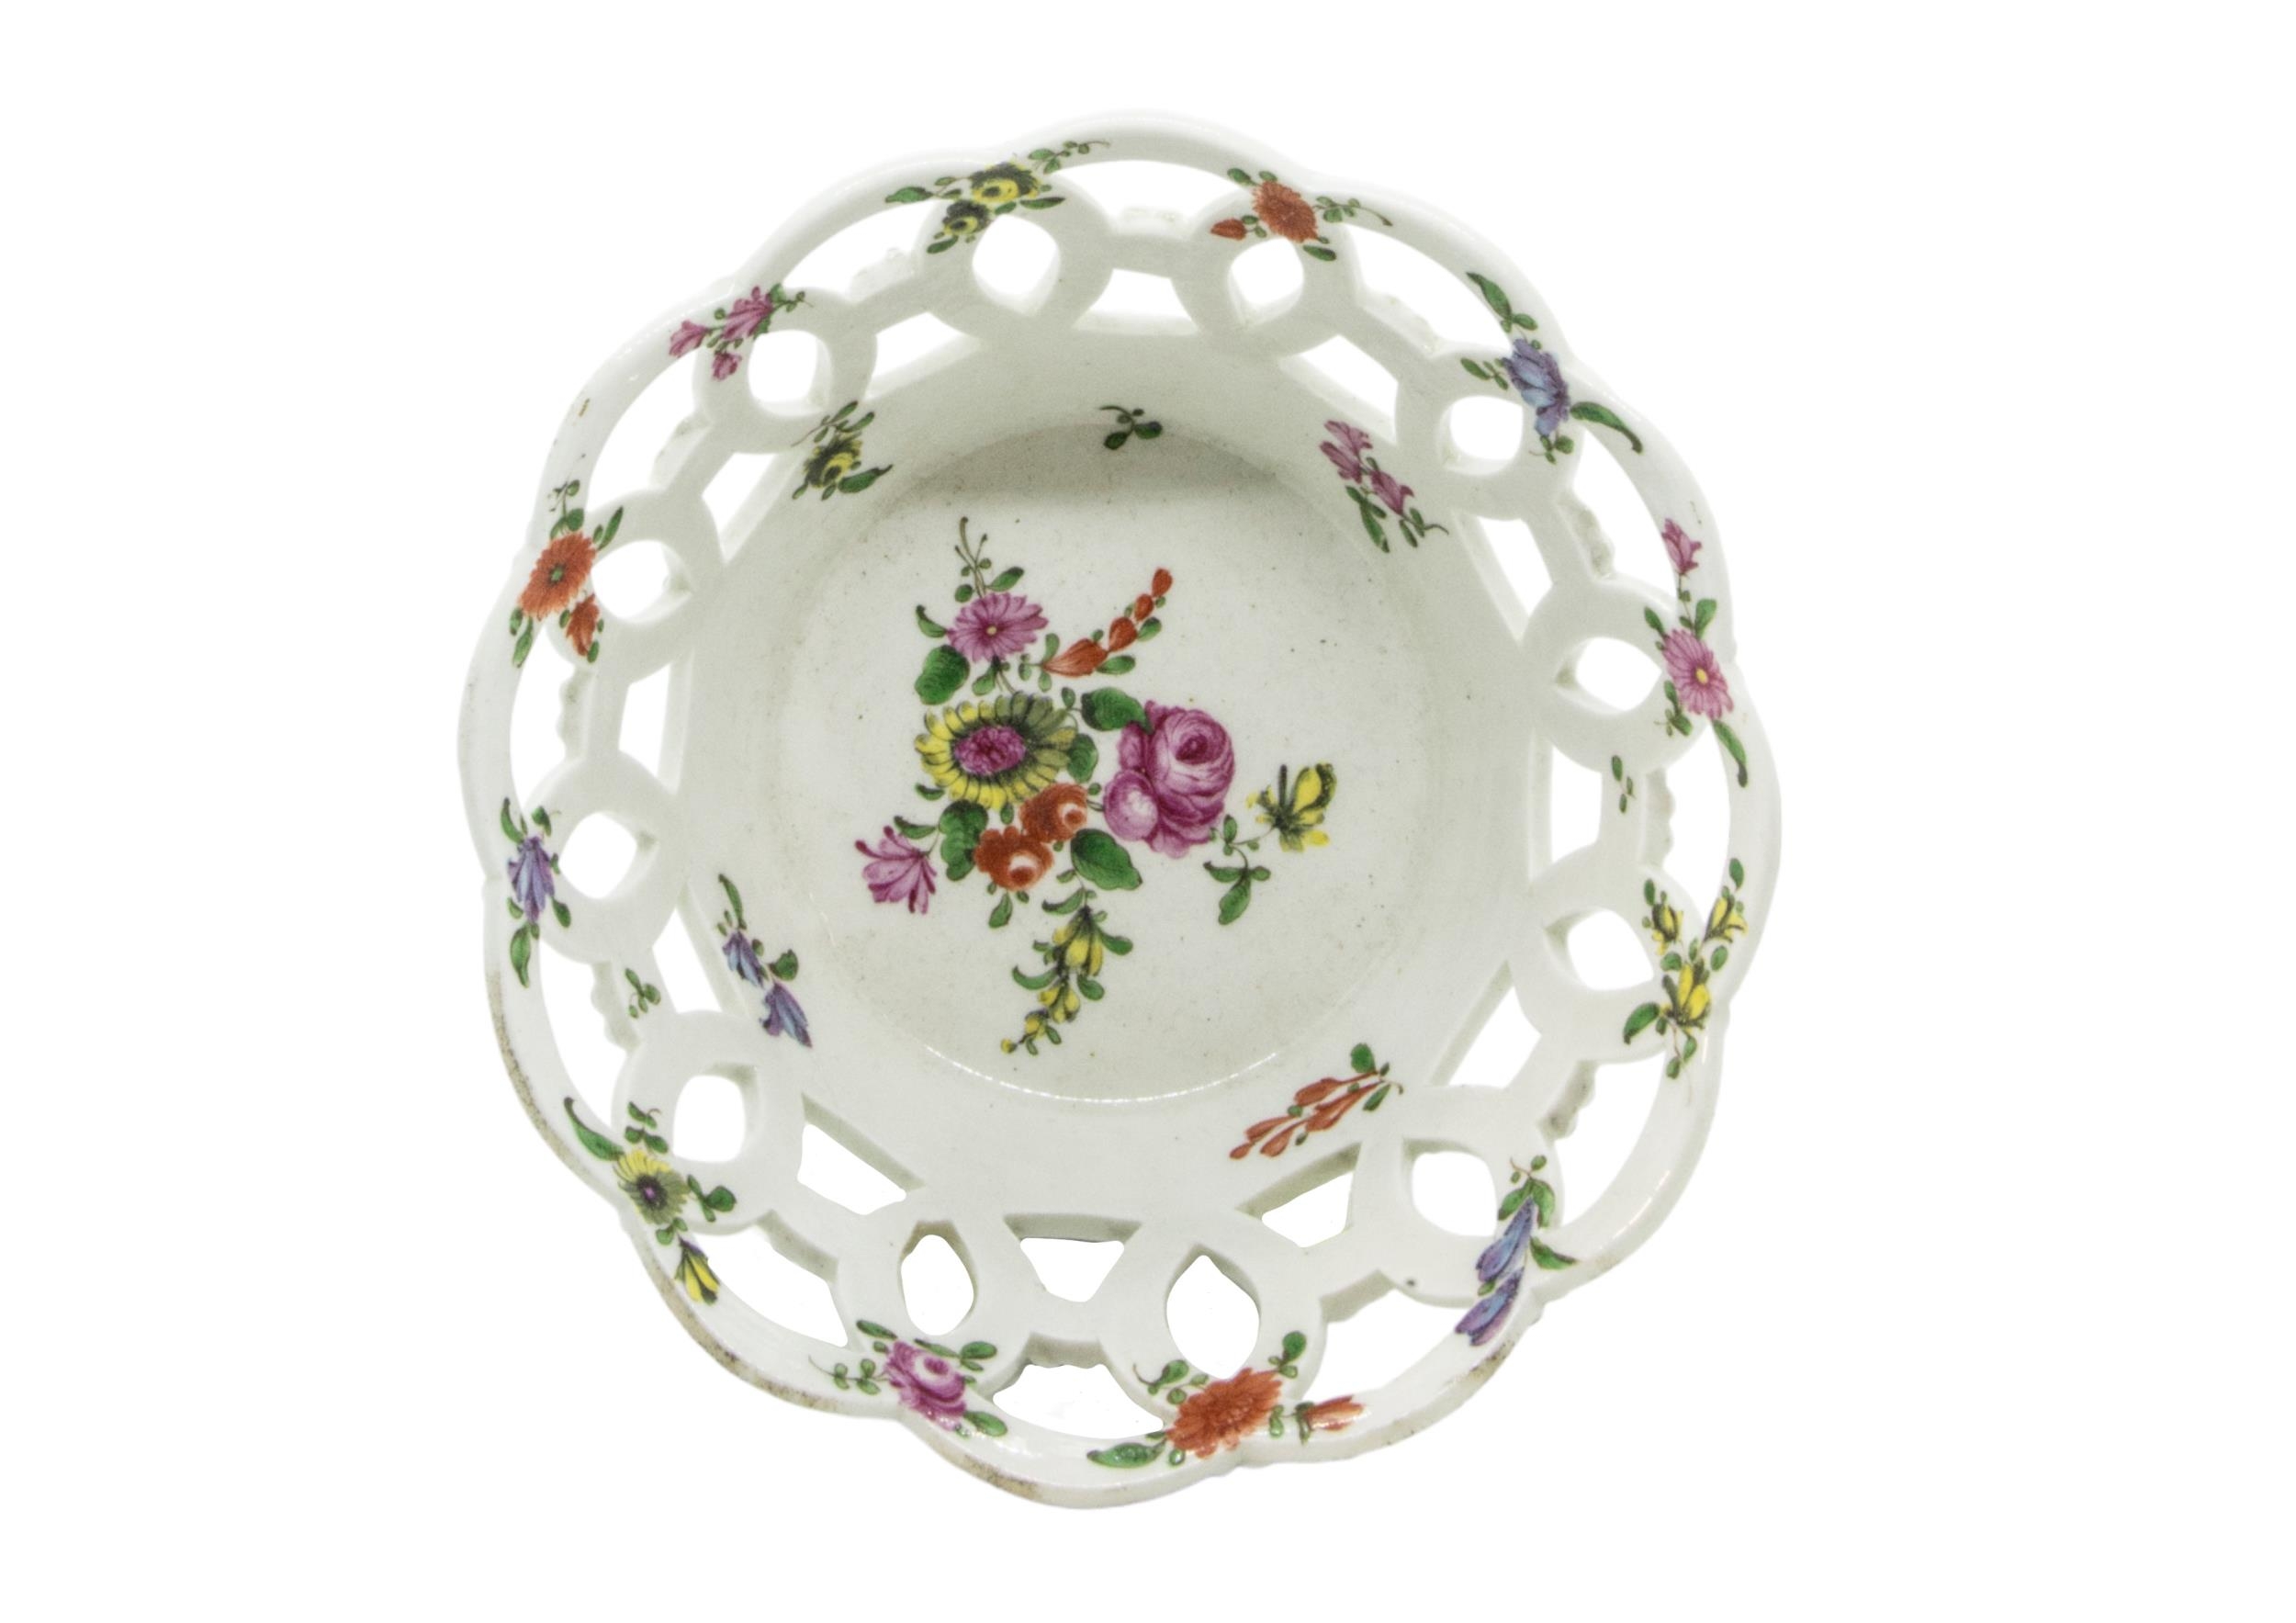 A LATE 18TH / EARLY 19TH CENTURY CHELSEA BASKET, painted with floral spray decoration, bearing a - Image 3 of 3